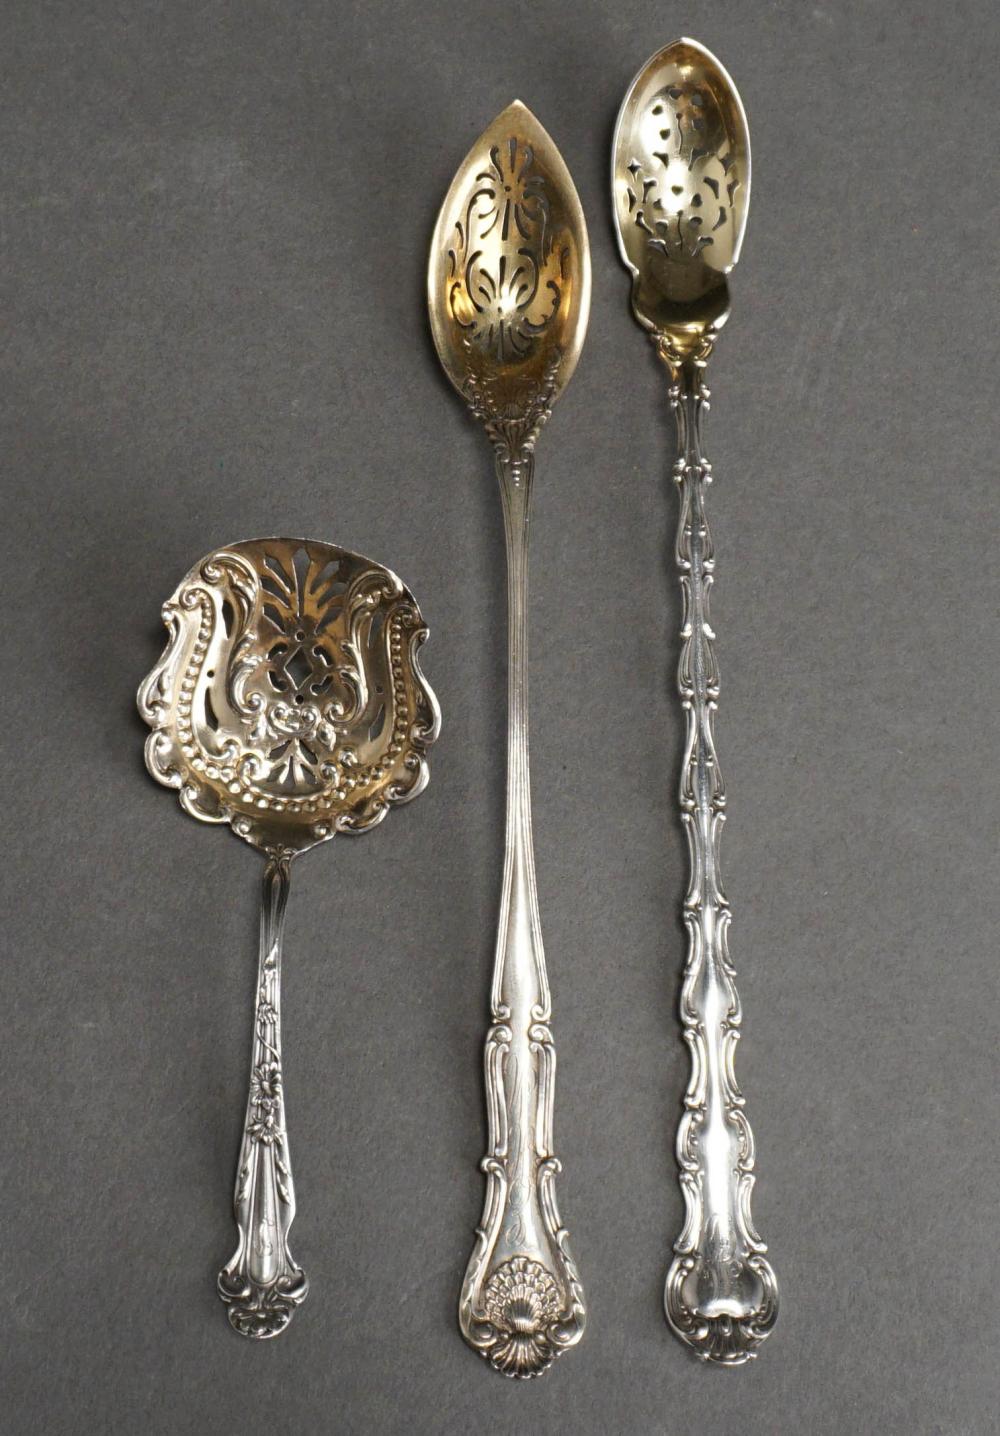 THREE STERLING SILVER CONDIMENT